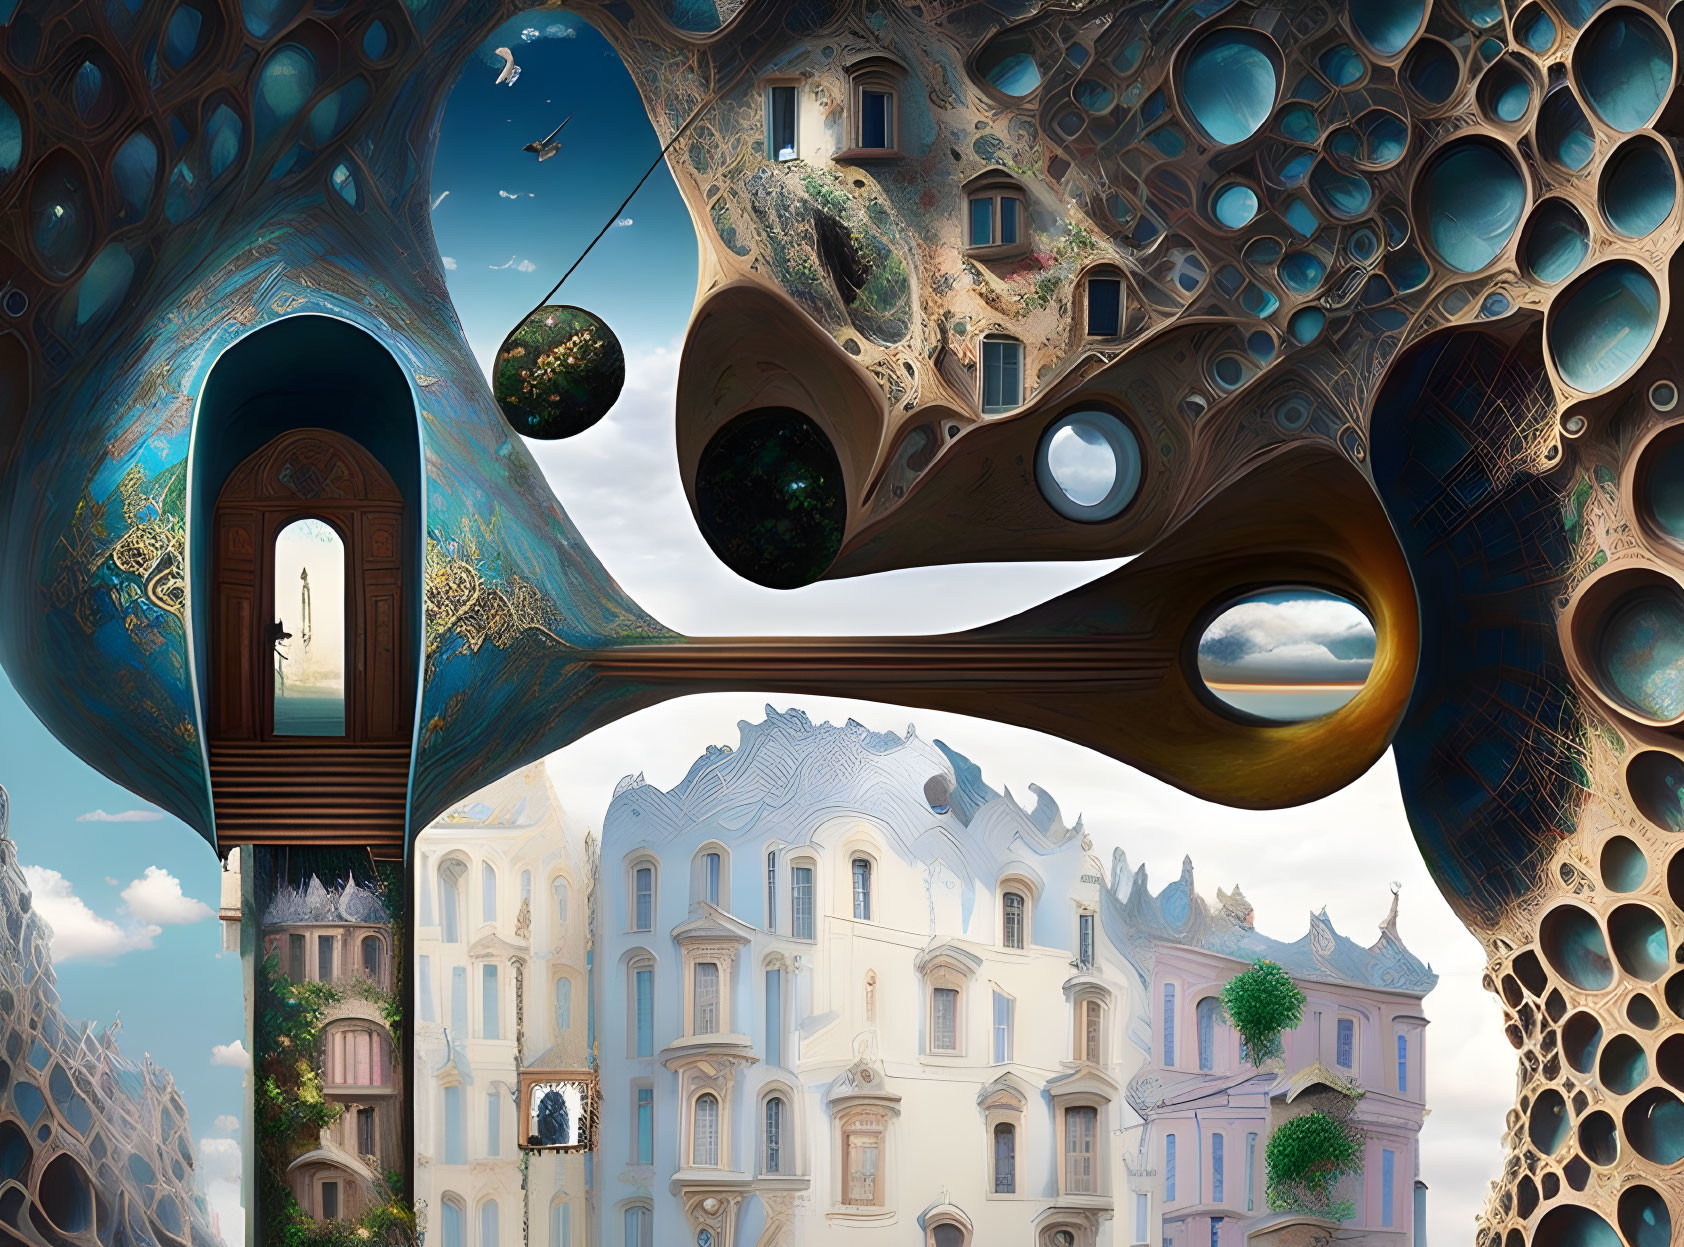 Surrealistic landscape with organic structures and floating orbs.